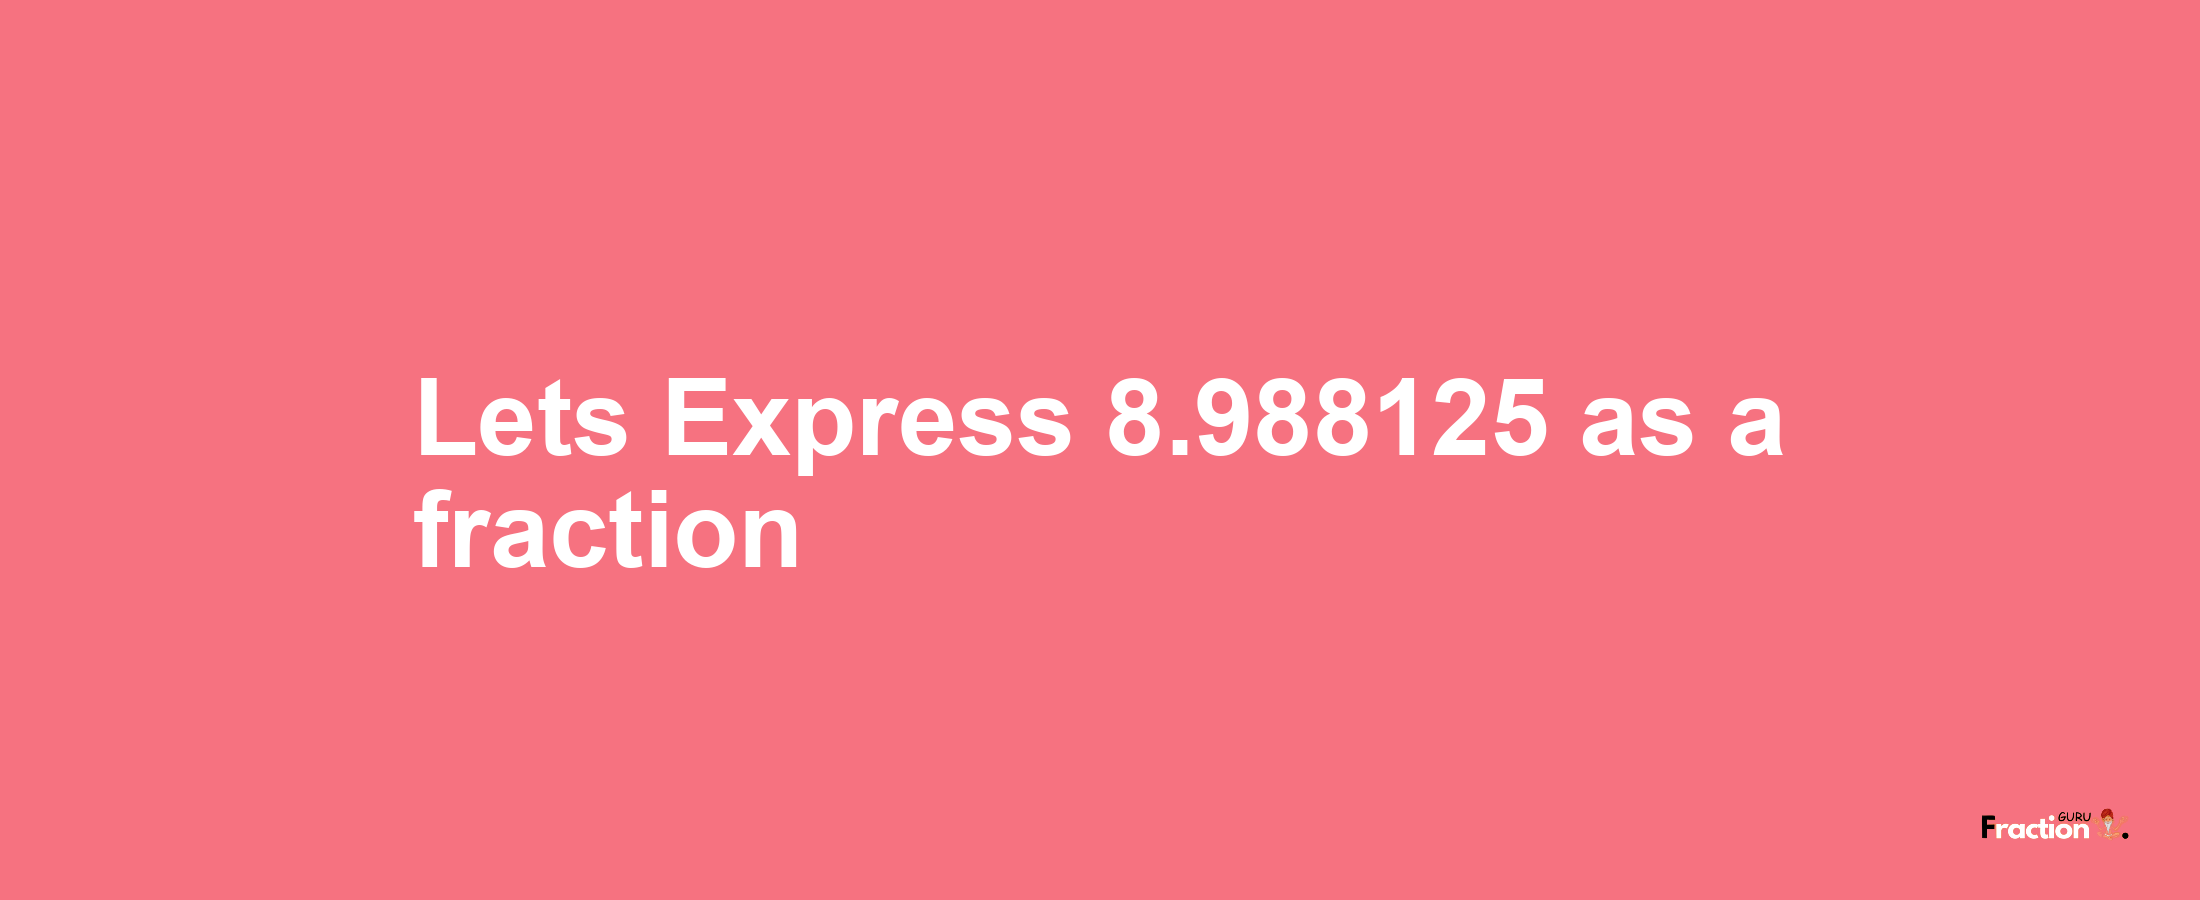 Lets Express 8.988125 as afraction